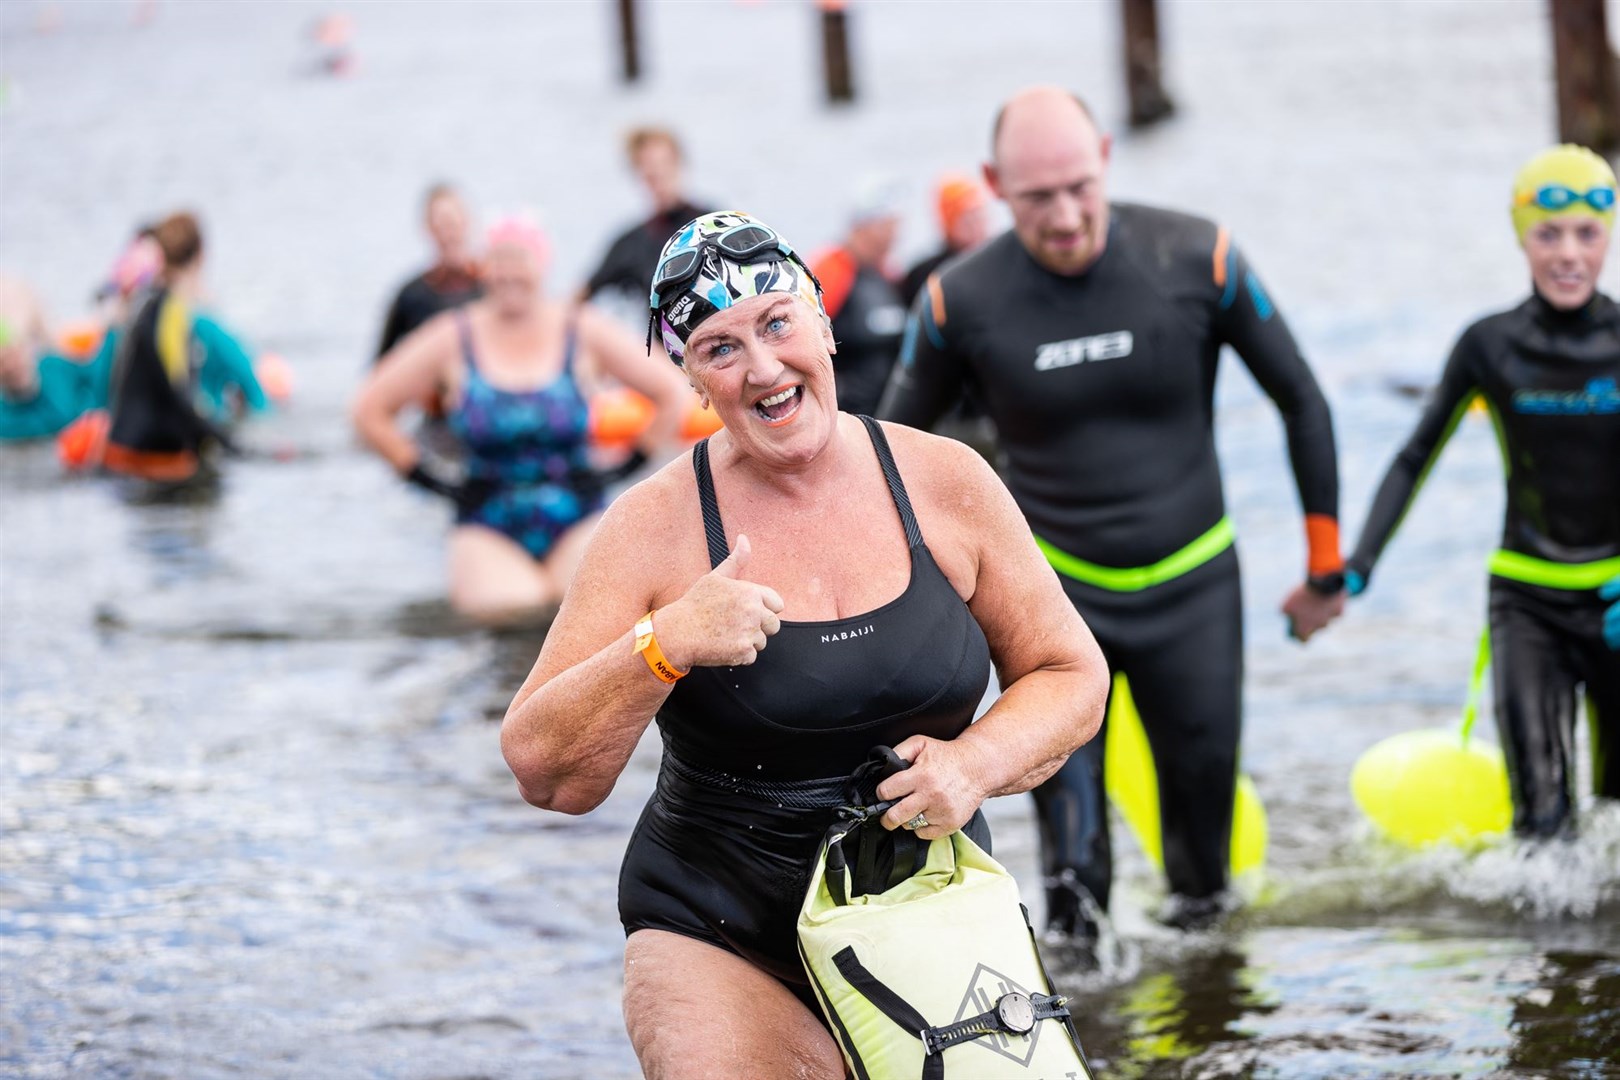 Swimmers take to the chilly waters of Inverness for the Kessock Ferry Swim, returning after a 50 year gap. This classic route from South to North Kessock, and back again is approximately 1200m long and took place in exposed tidal water with an experienced safety support crew in support.